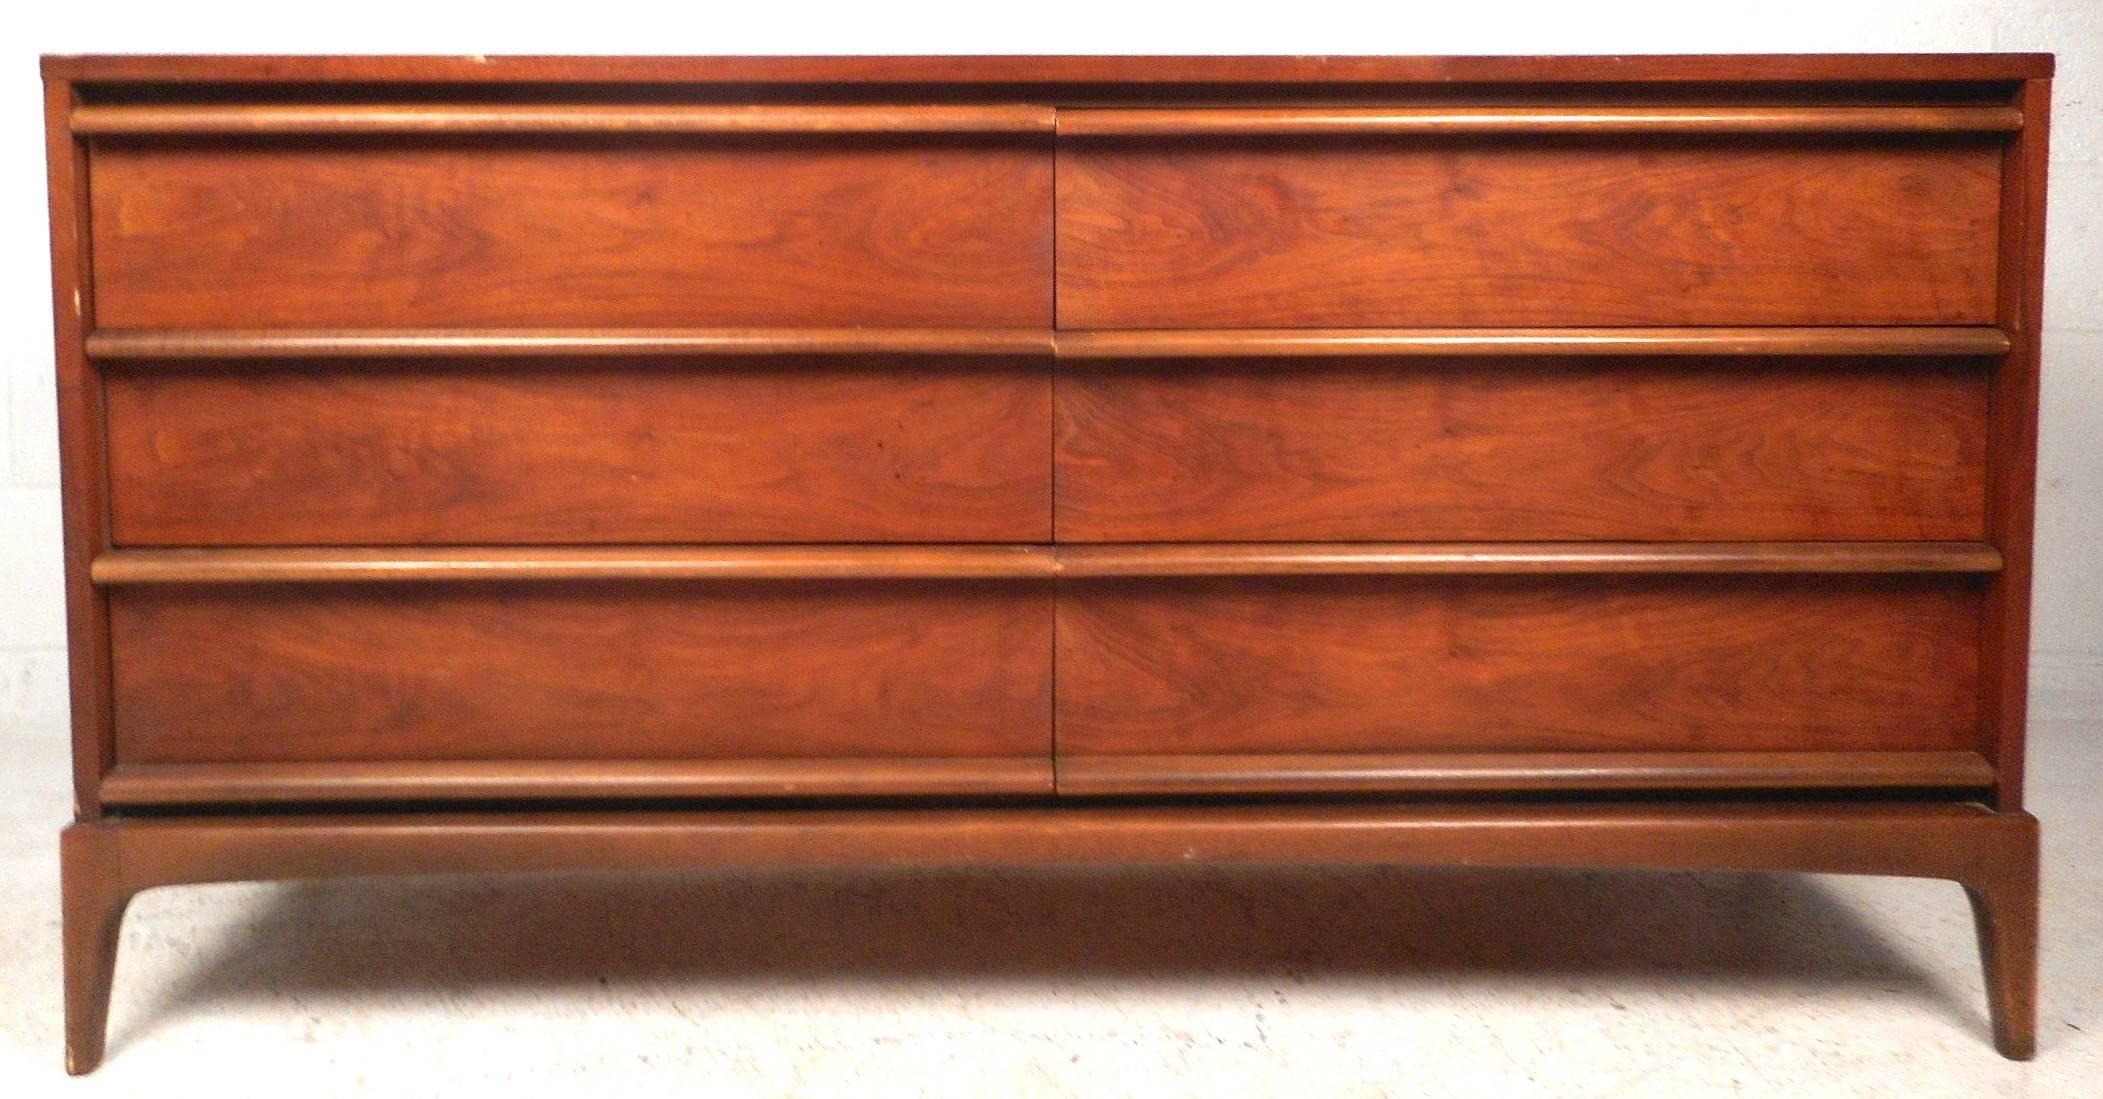 This stunning vintage modern set features eleven hefty drawers combined providing plenty of room for storage. Beautiful walnut wood grain runs different directions on the top edges displaying quality craftsmanship. The unique sculpted base has four